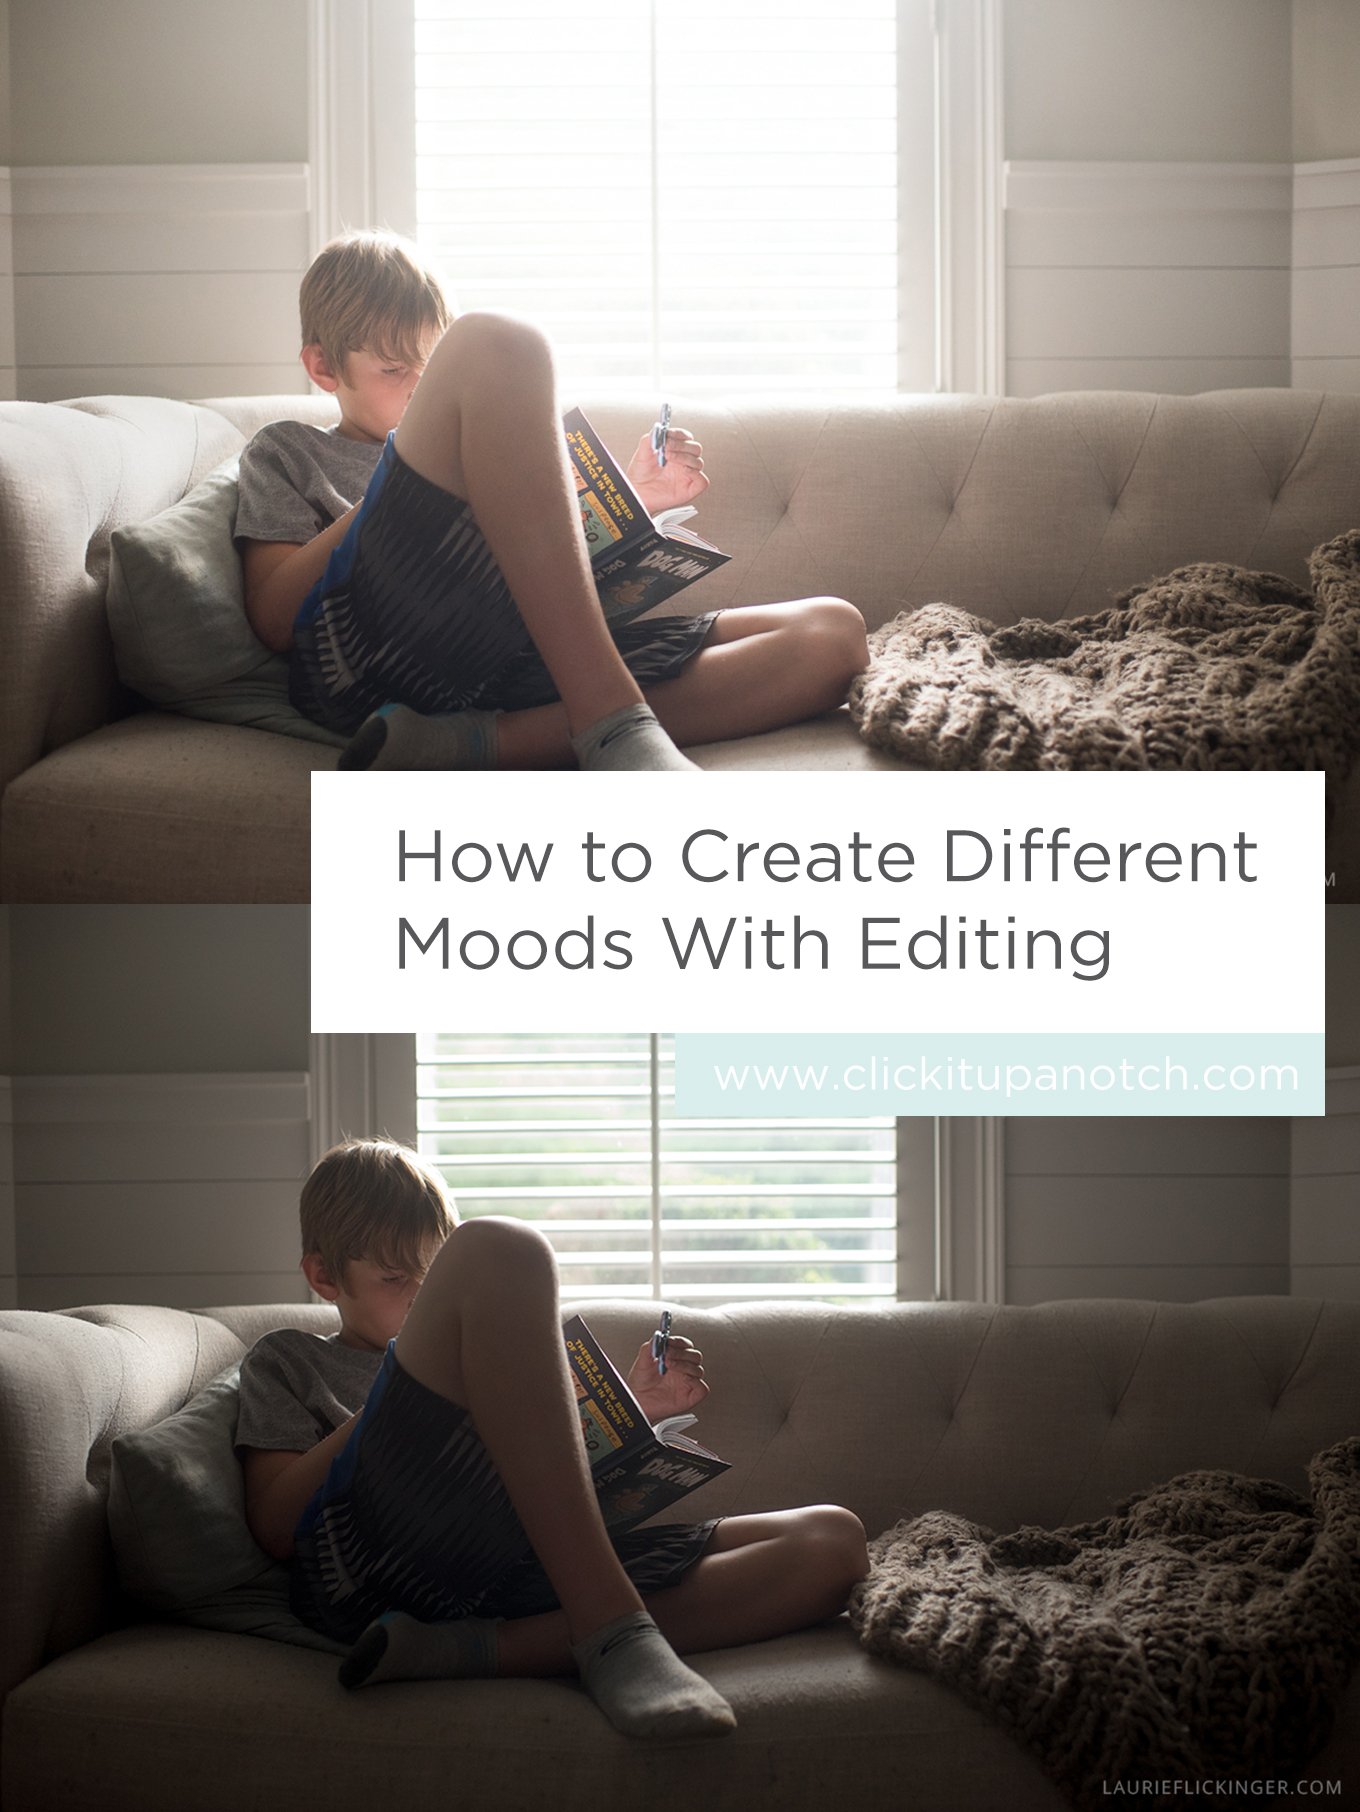 I love how simple this is and that she also included a video! Read - "How to Create Different Moods With Editing"